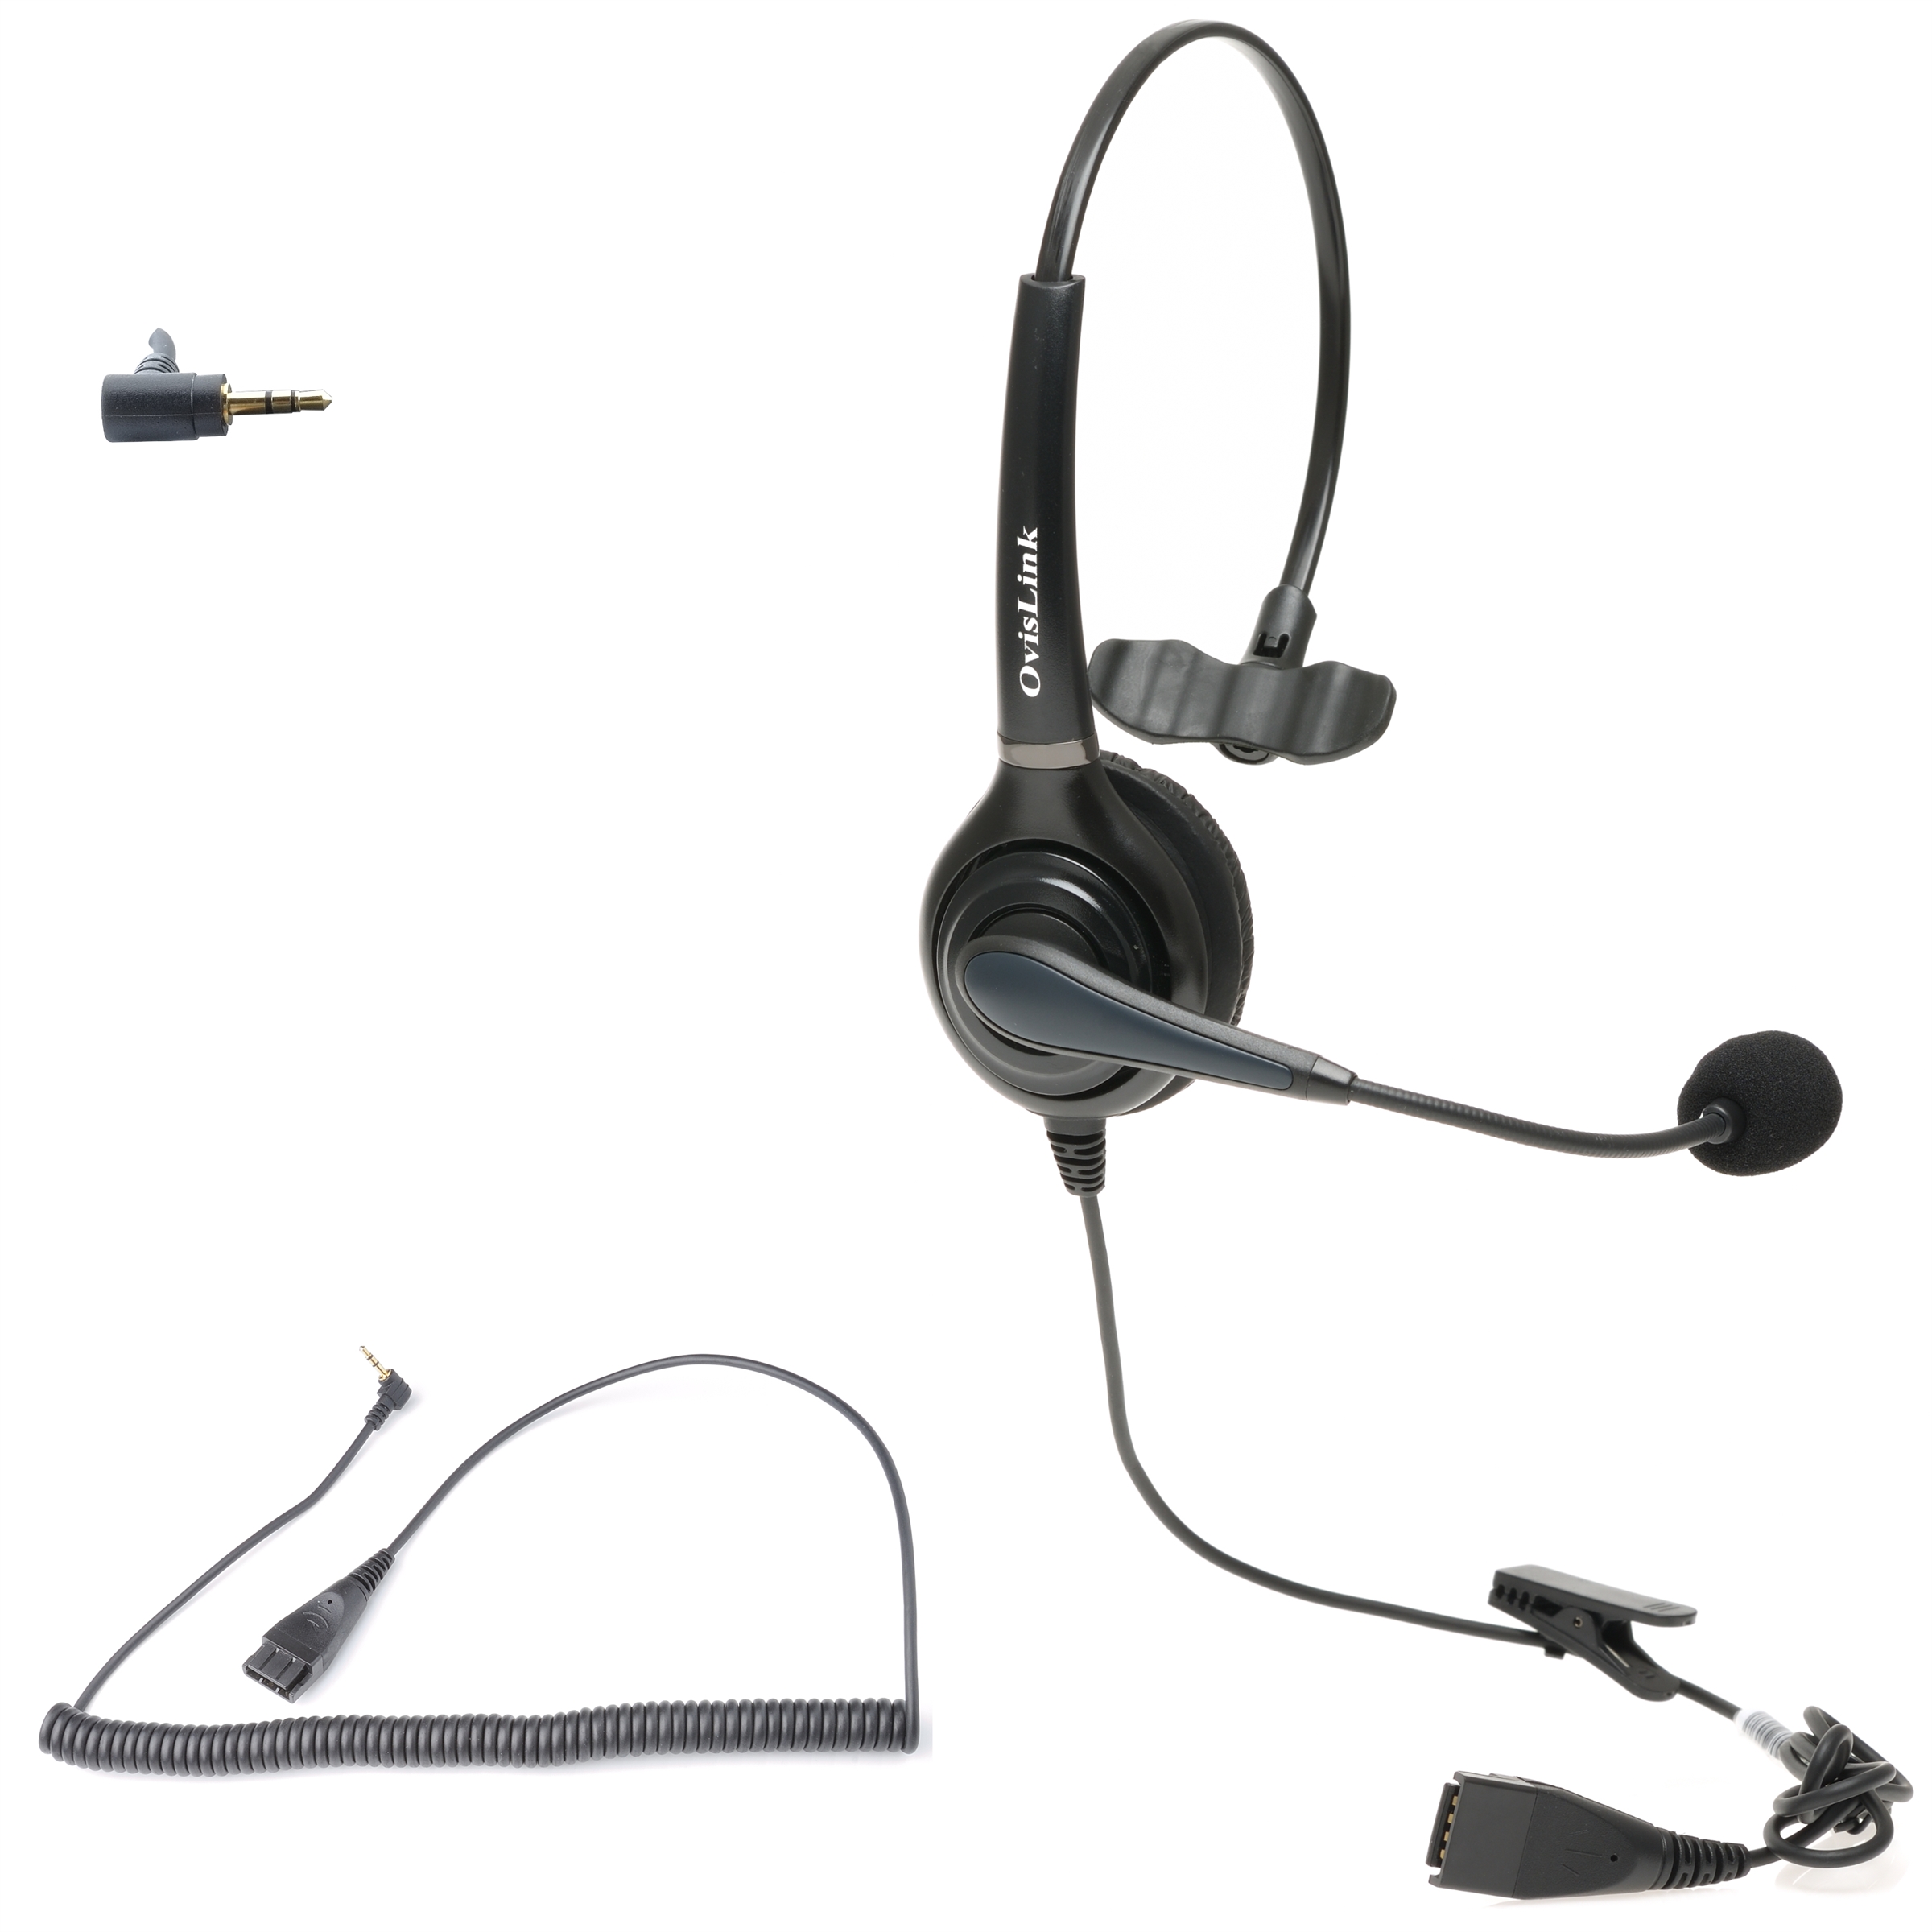 Cisco SPA IP phone headset for call center and office